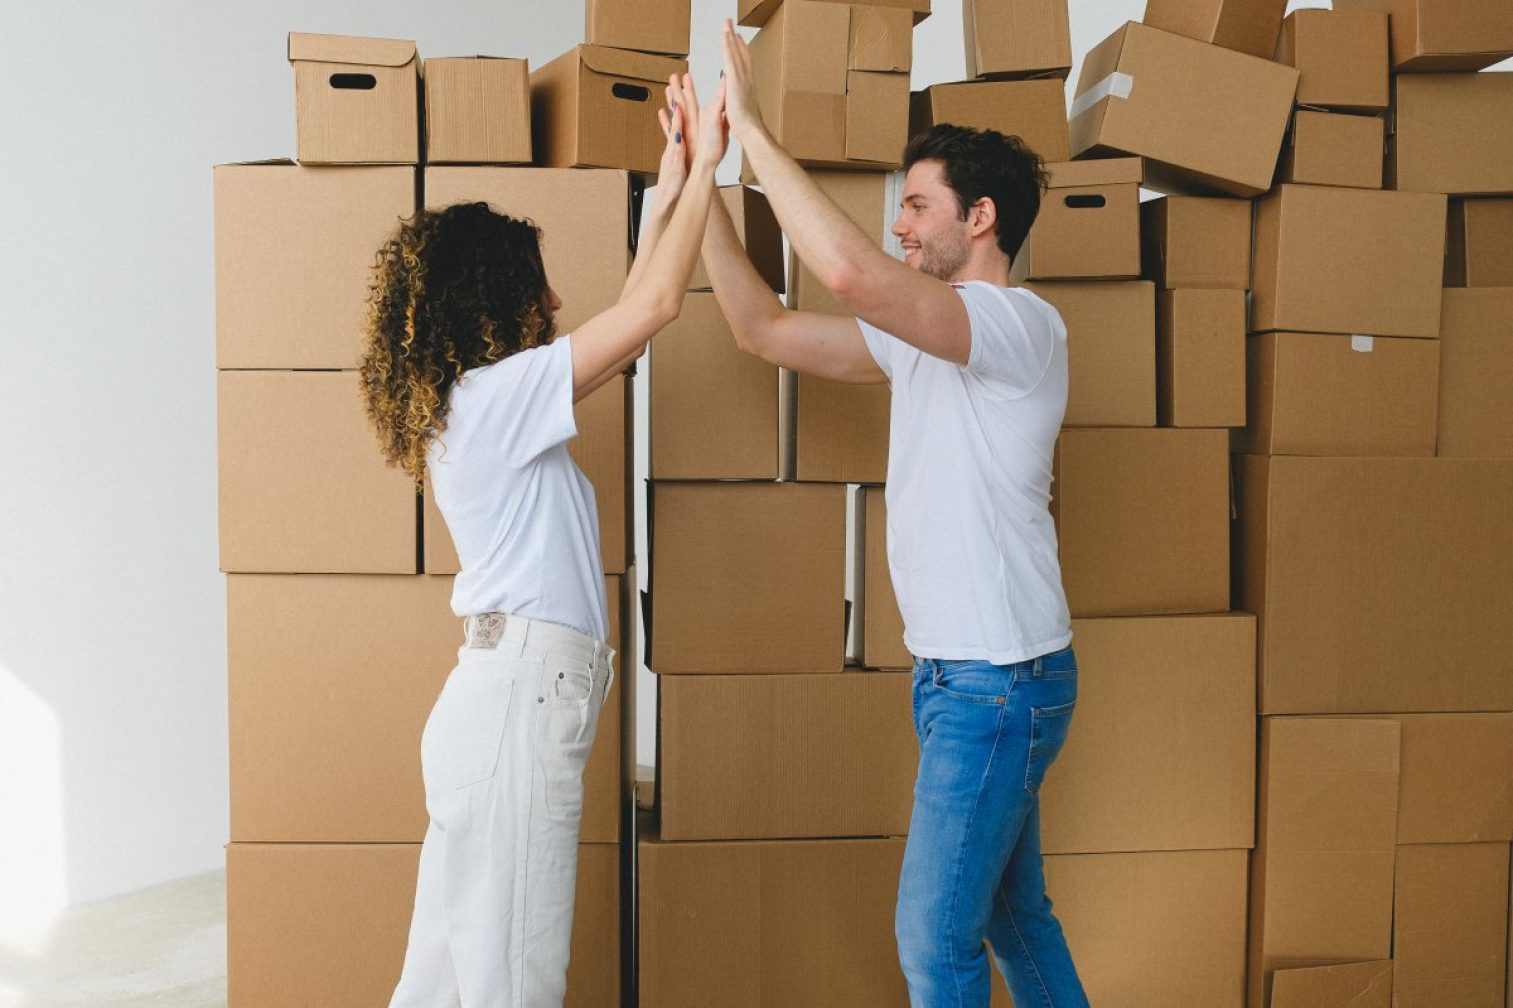 Smiling couple giving high five after moving into new house